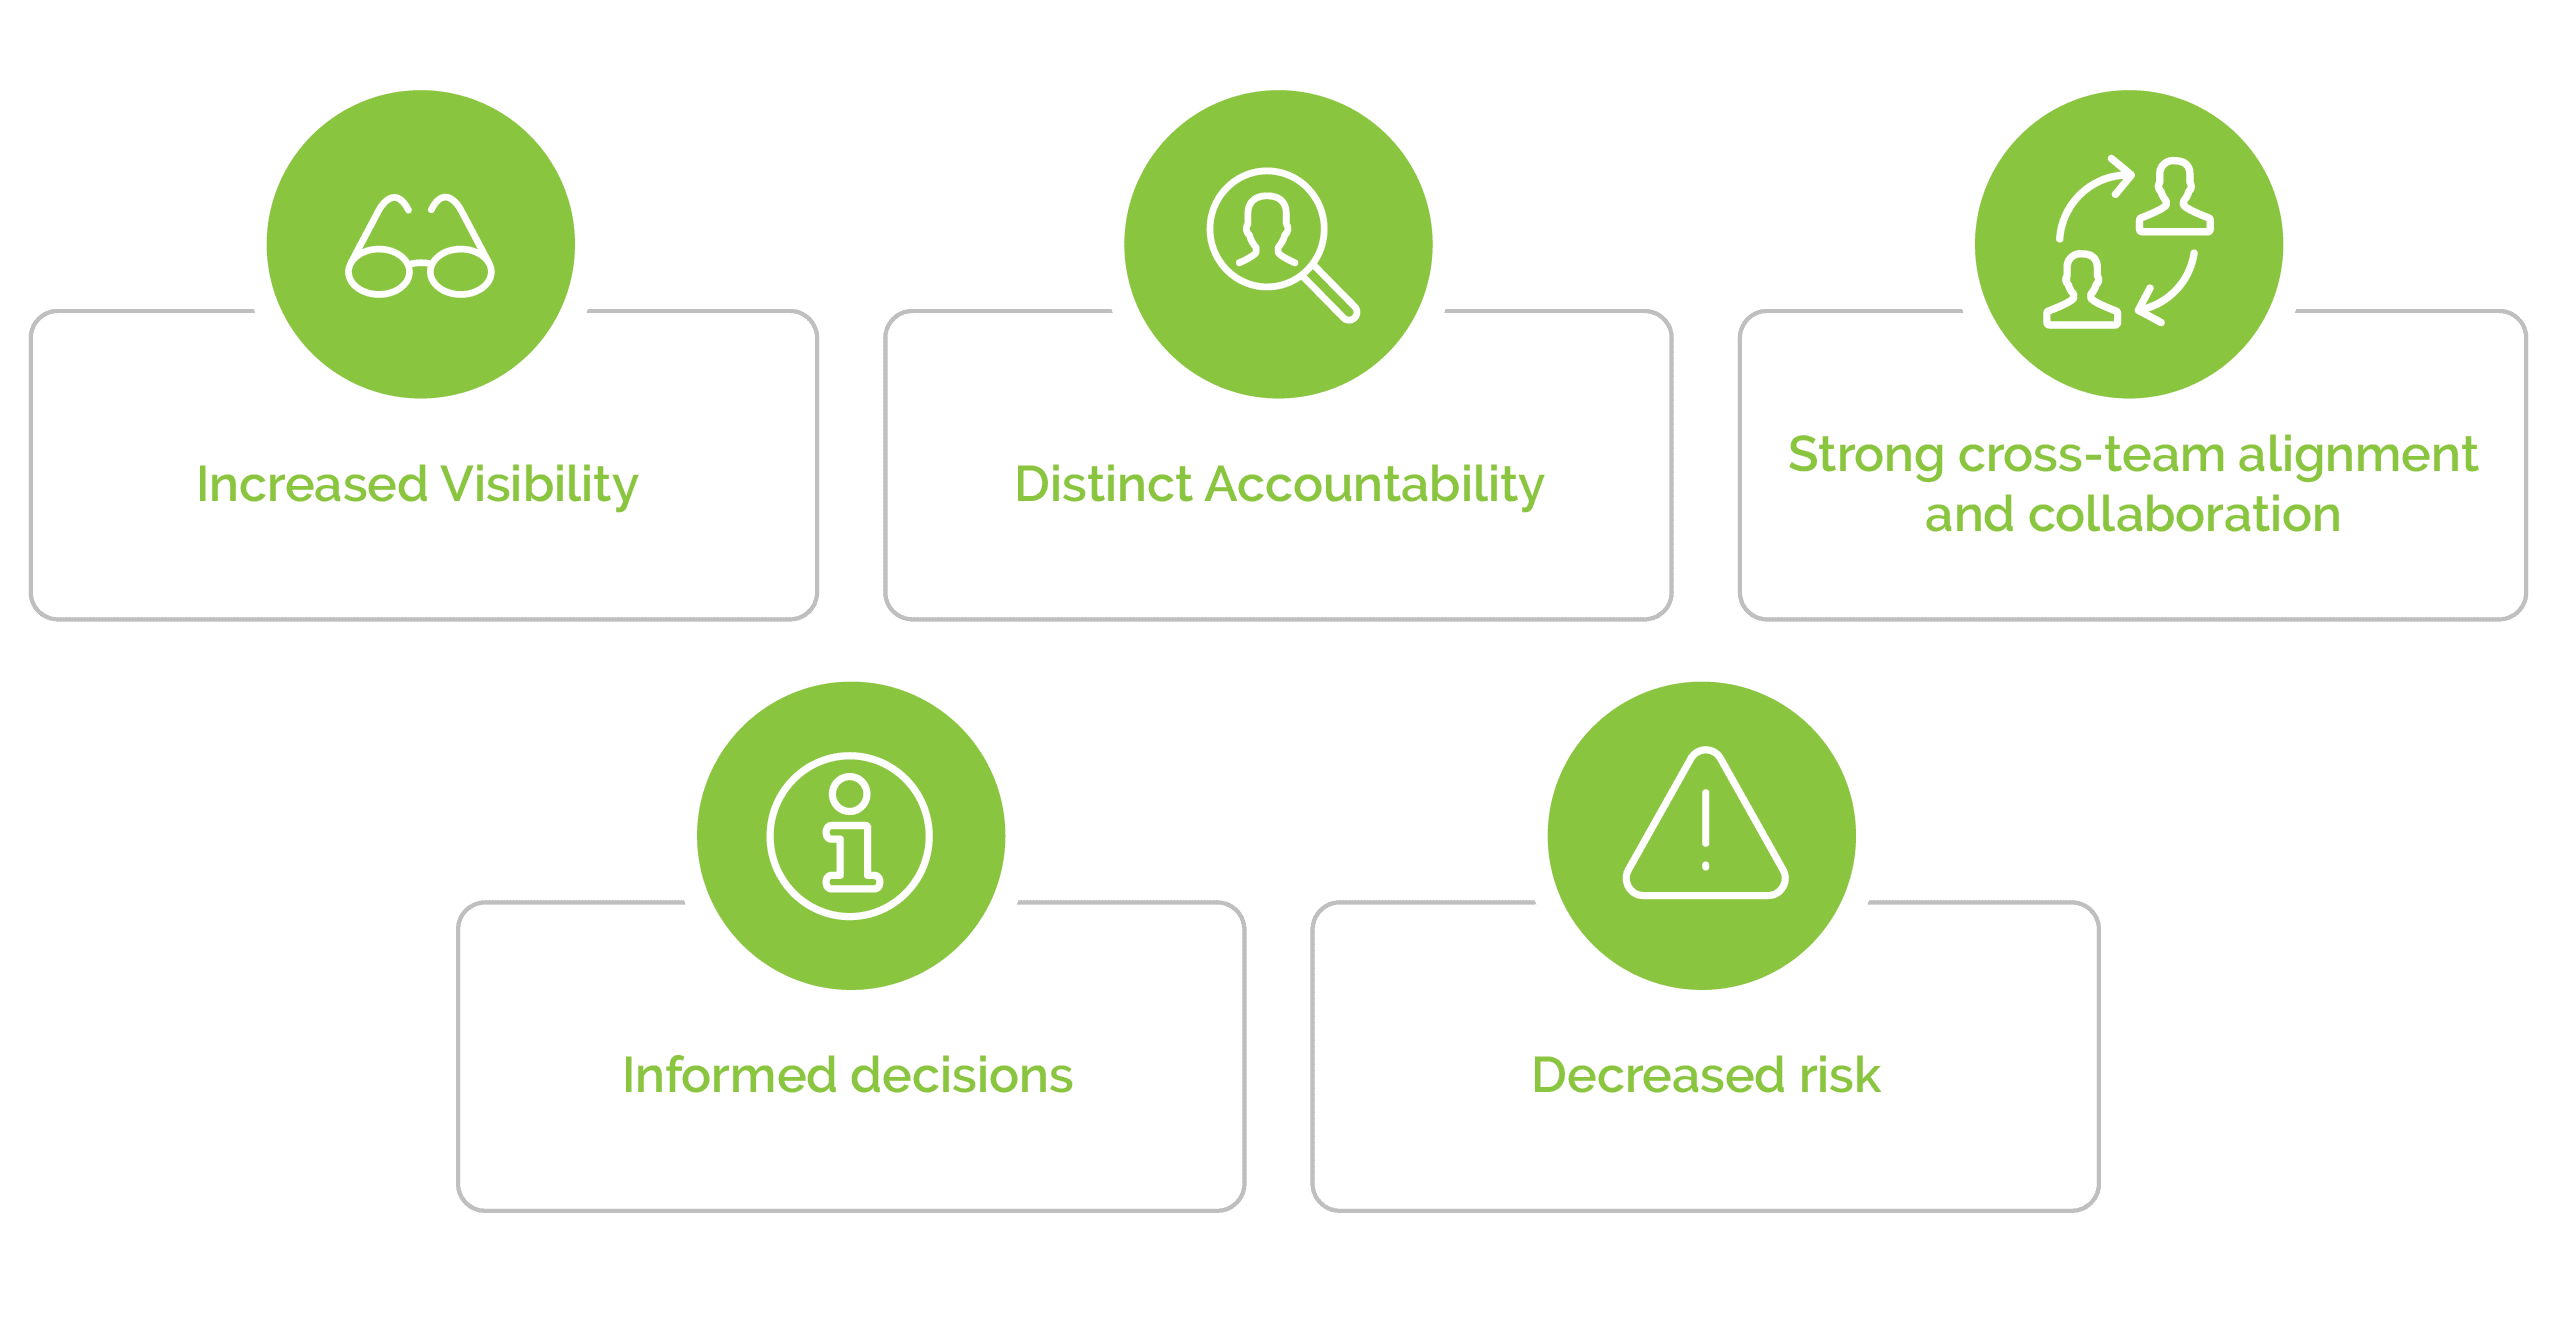 Graphic with Business Intelligence elements: increased visibility, distinct accountability, strong cross-team alignment and collaboration, informed decisions, and decreased risk